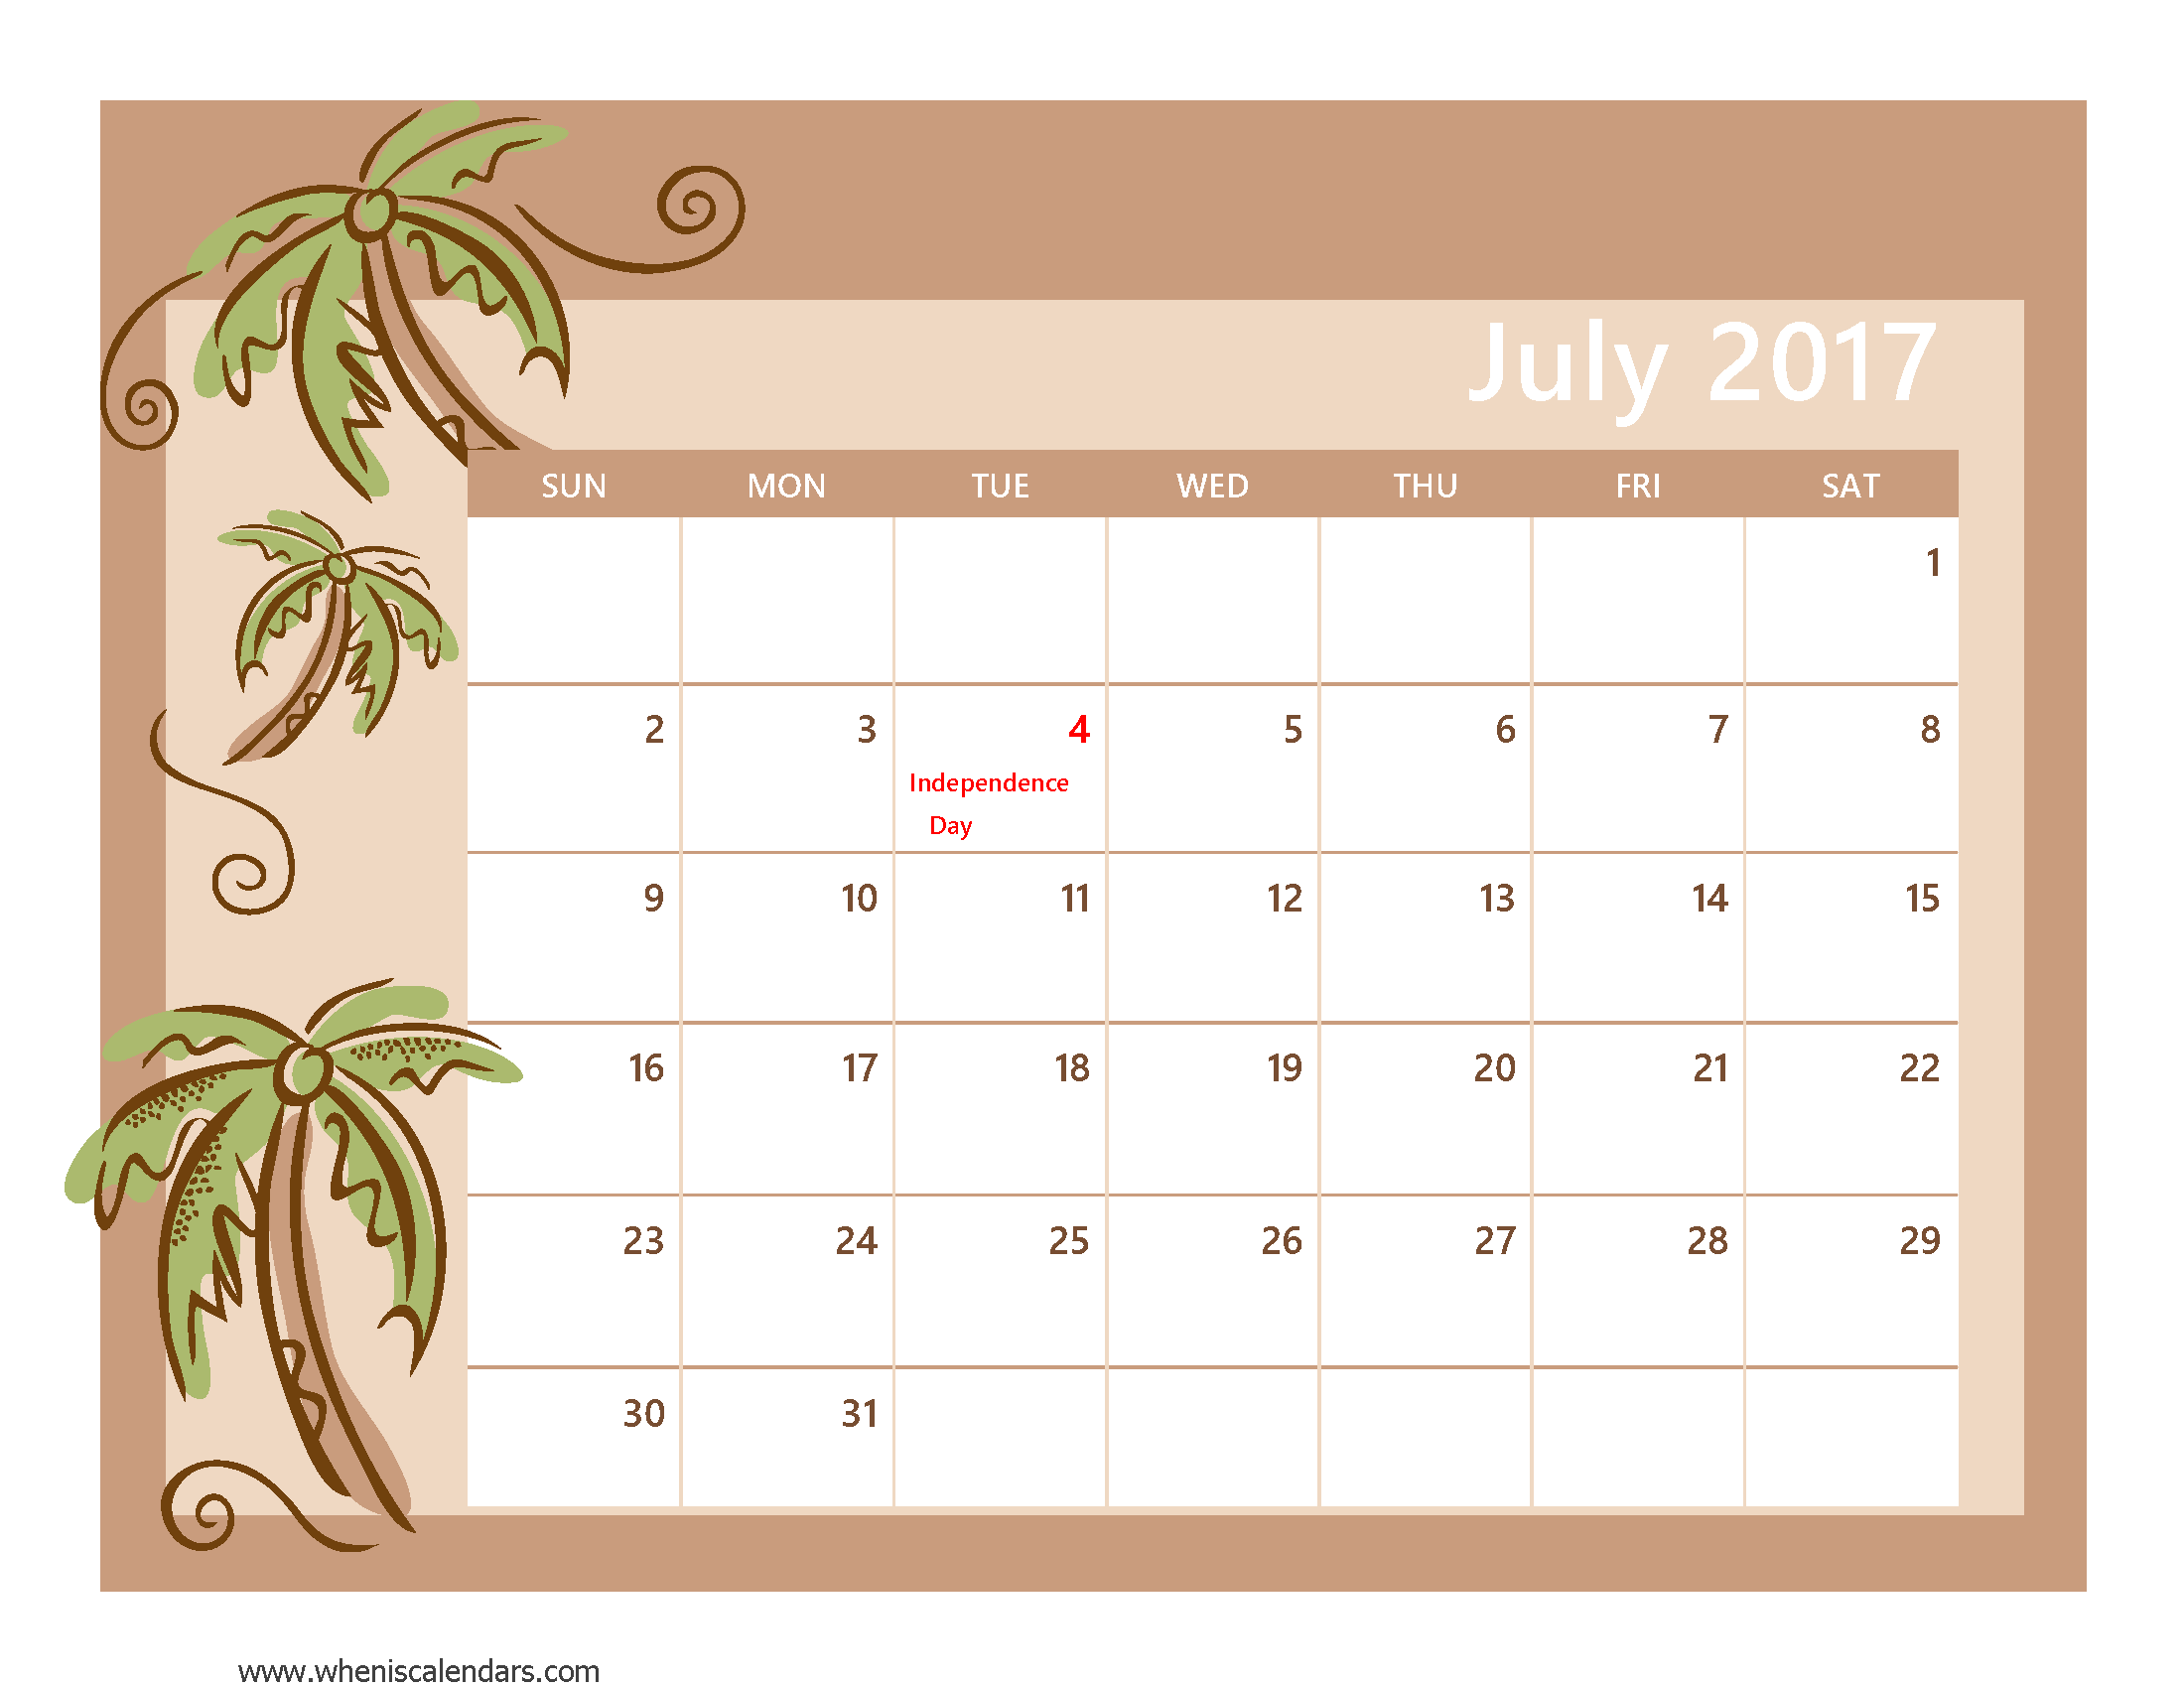 July 2017 Calendar With US Holidays